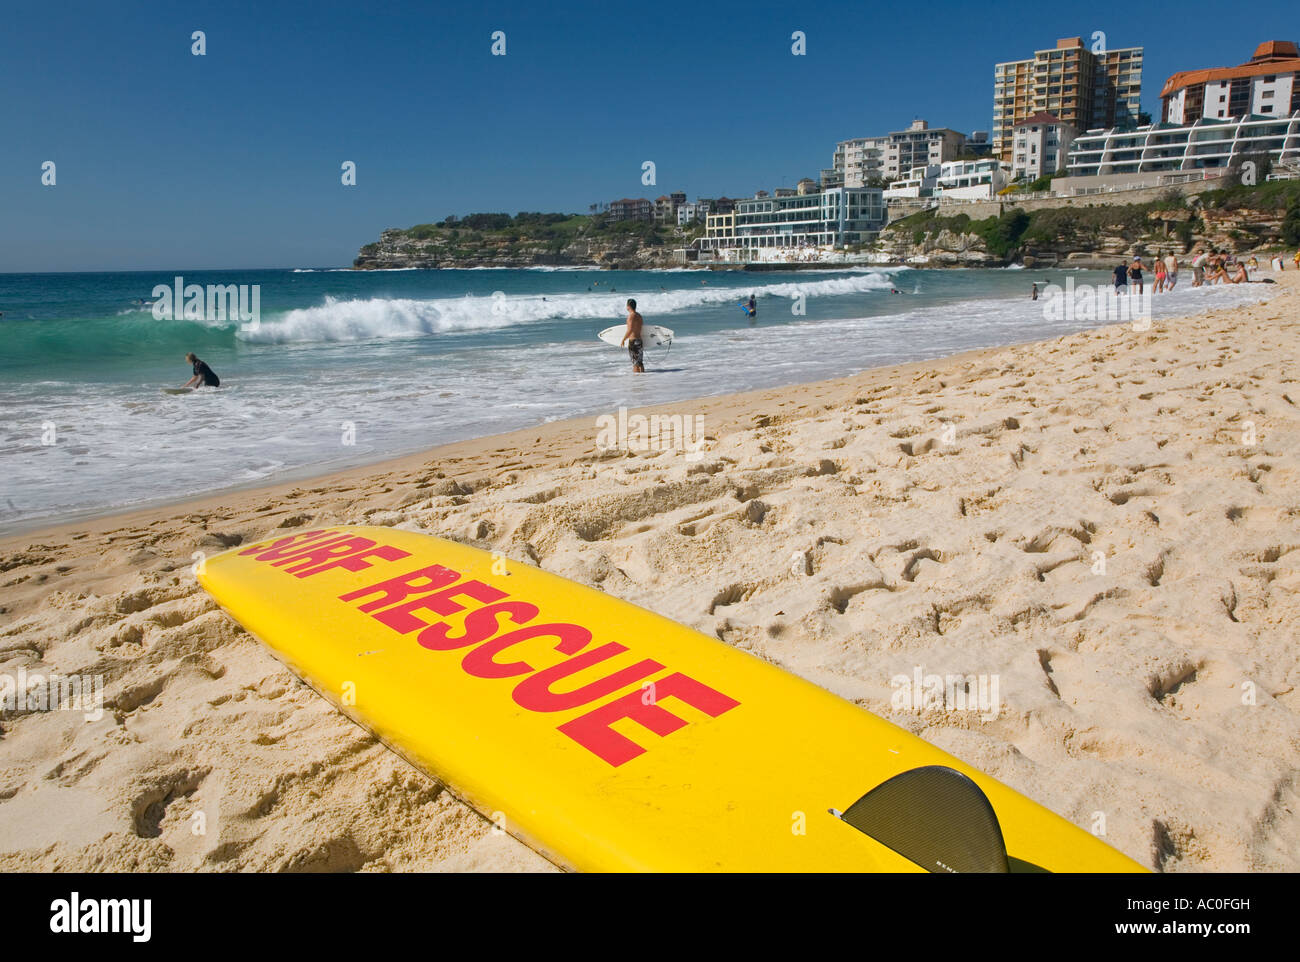 A surf rescue board lies on the beach at Bondi on Sydney s eastern beaches Stock Photo